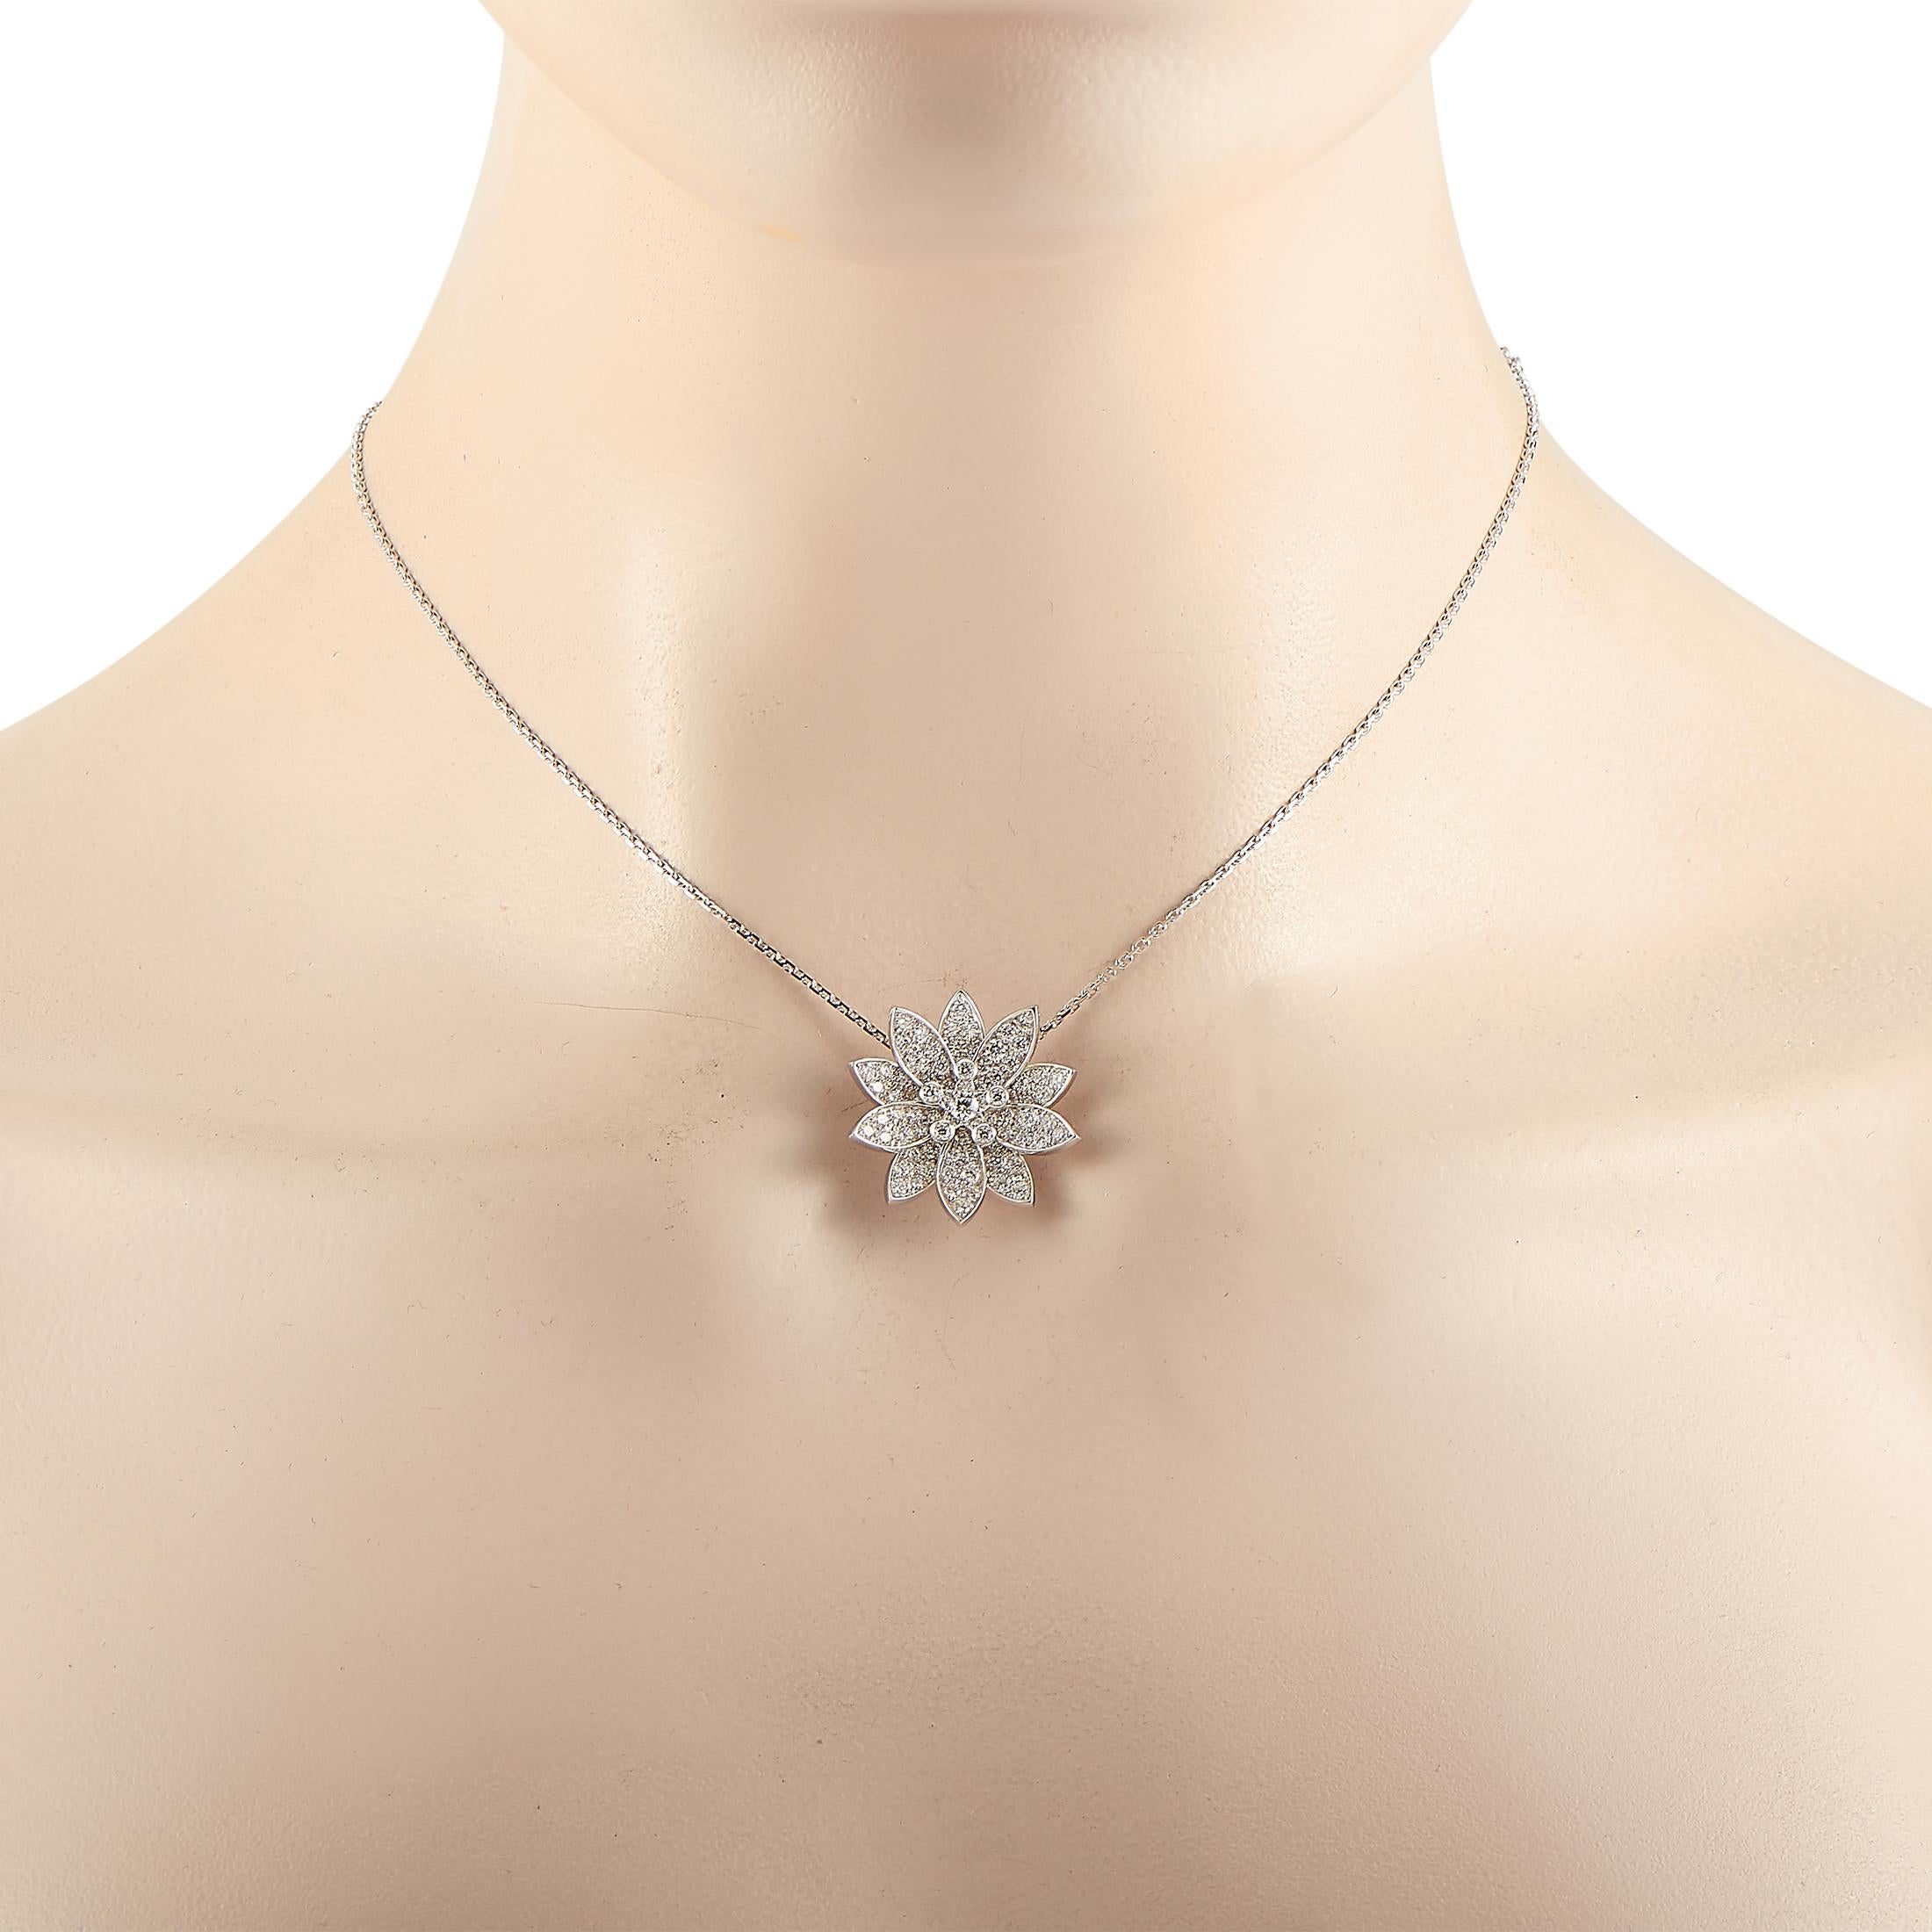 The Van Cleef & Arpels “Lotus” necklace is made of 18K white gold and embellished with diamonds. The necklace weighs 9.4 grams and boasts a 16” chain and a pendant that measures 1” in length and 1” in width.

This jewelry piece is offered in estate